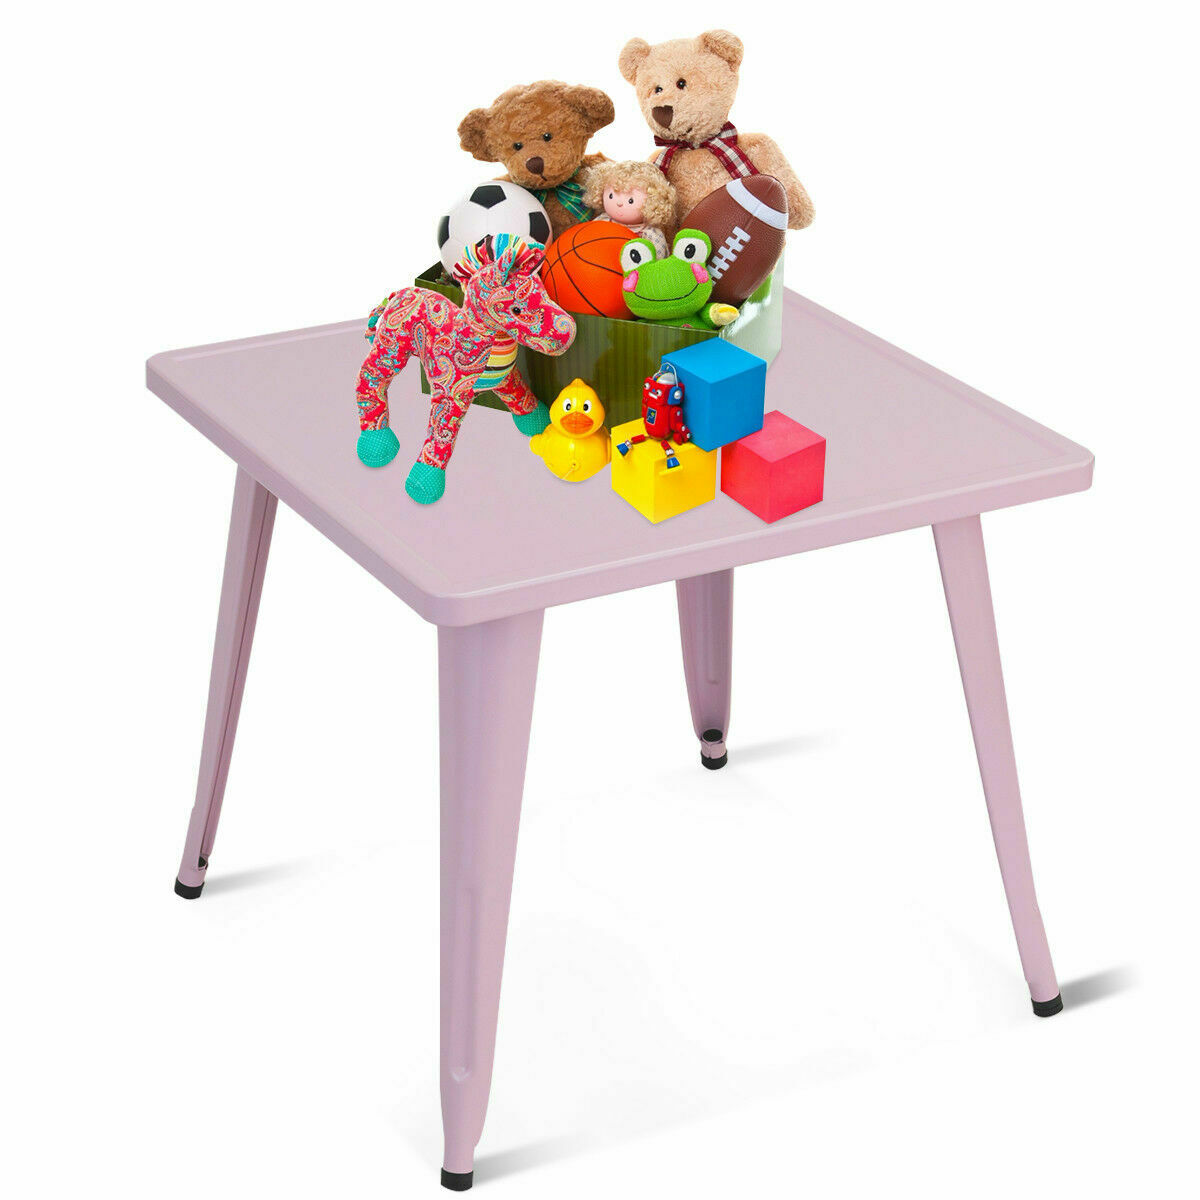 Costway 27" Square Table Kids Study Play Desk Steel  Home Classroom Pink